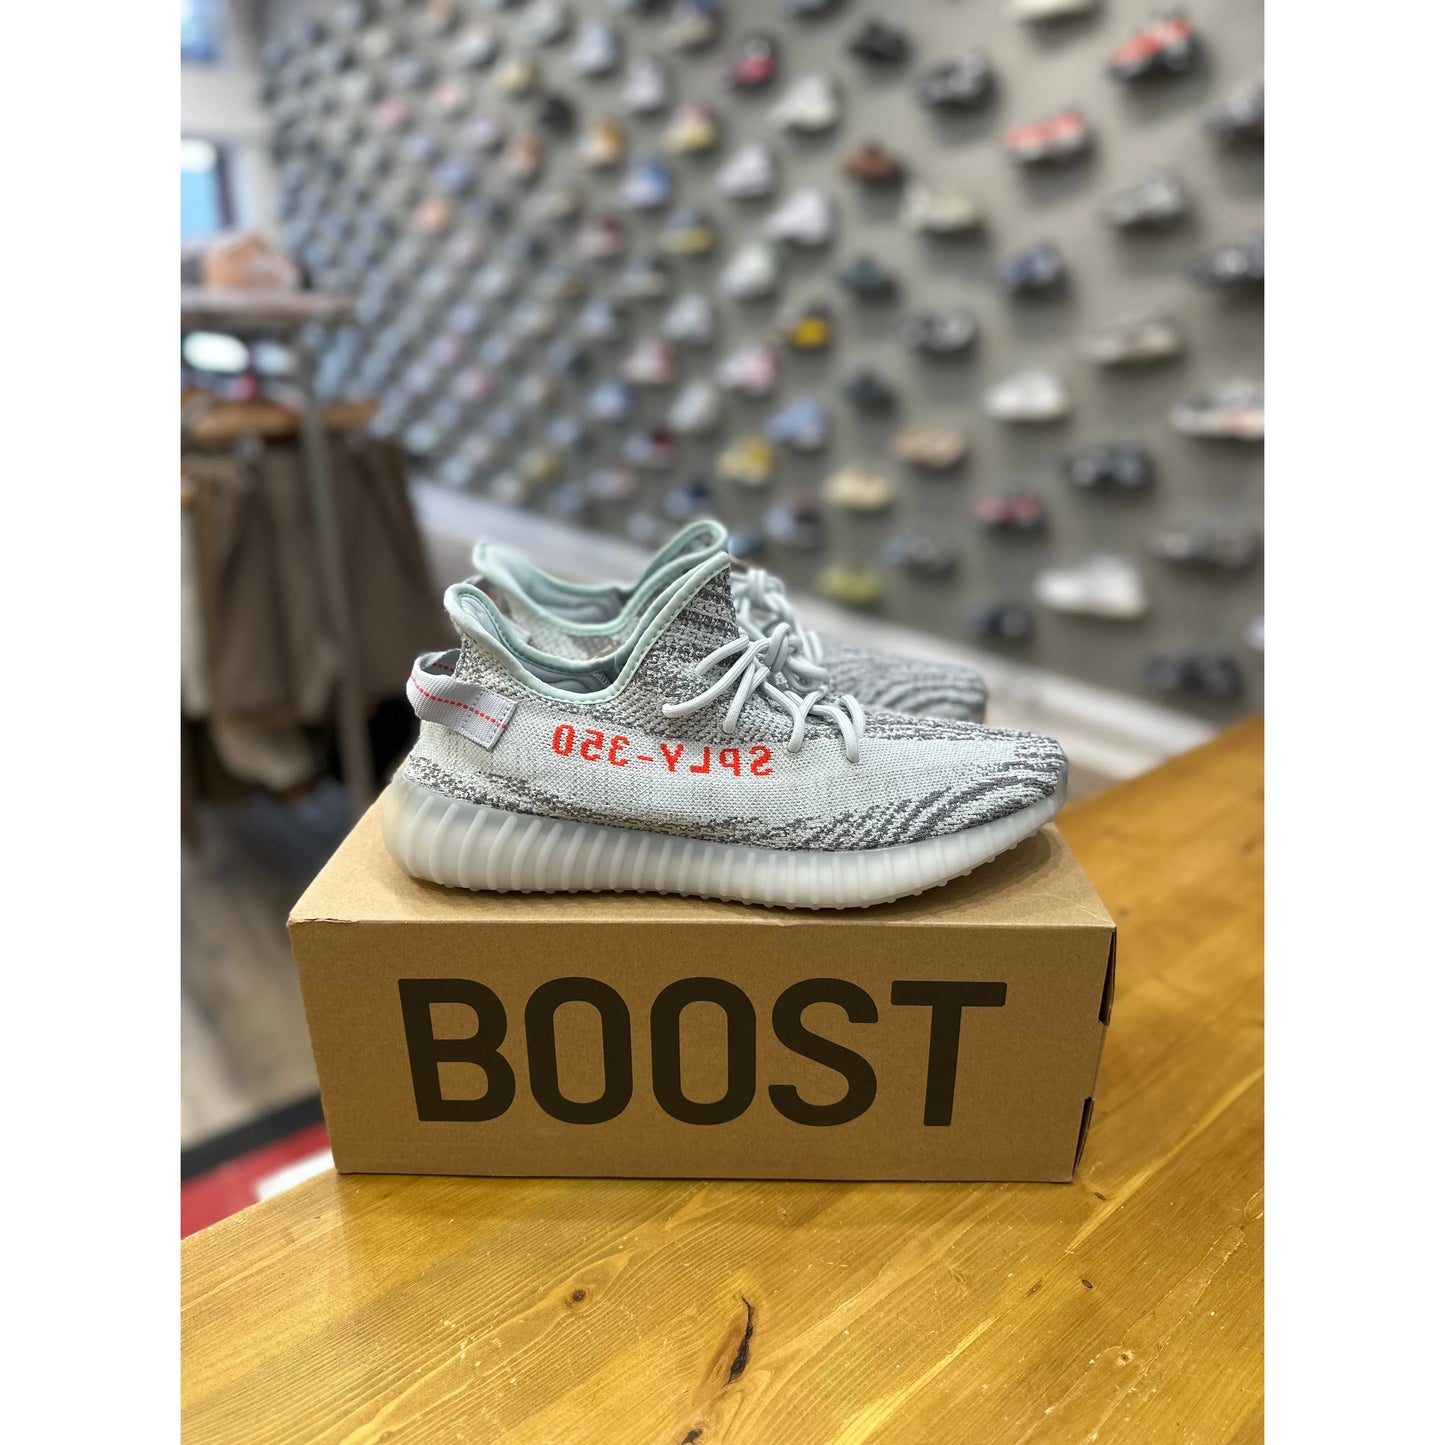 adidas Yeezy Boost 350 V2 Blue Tint from Yeezy